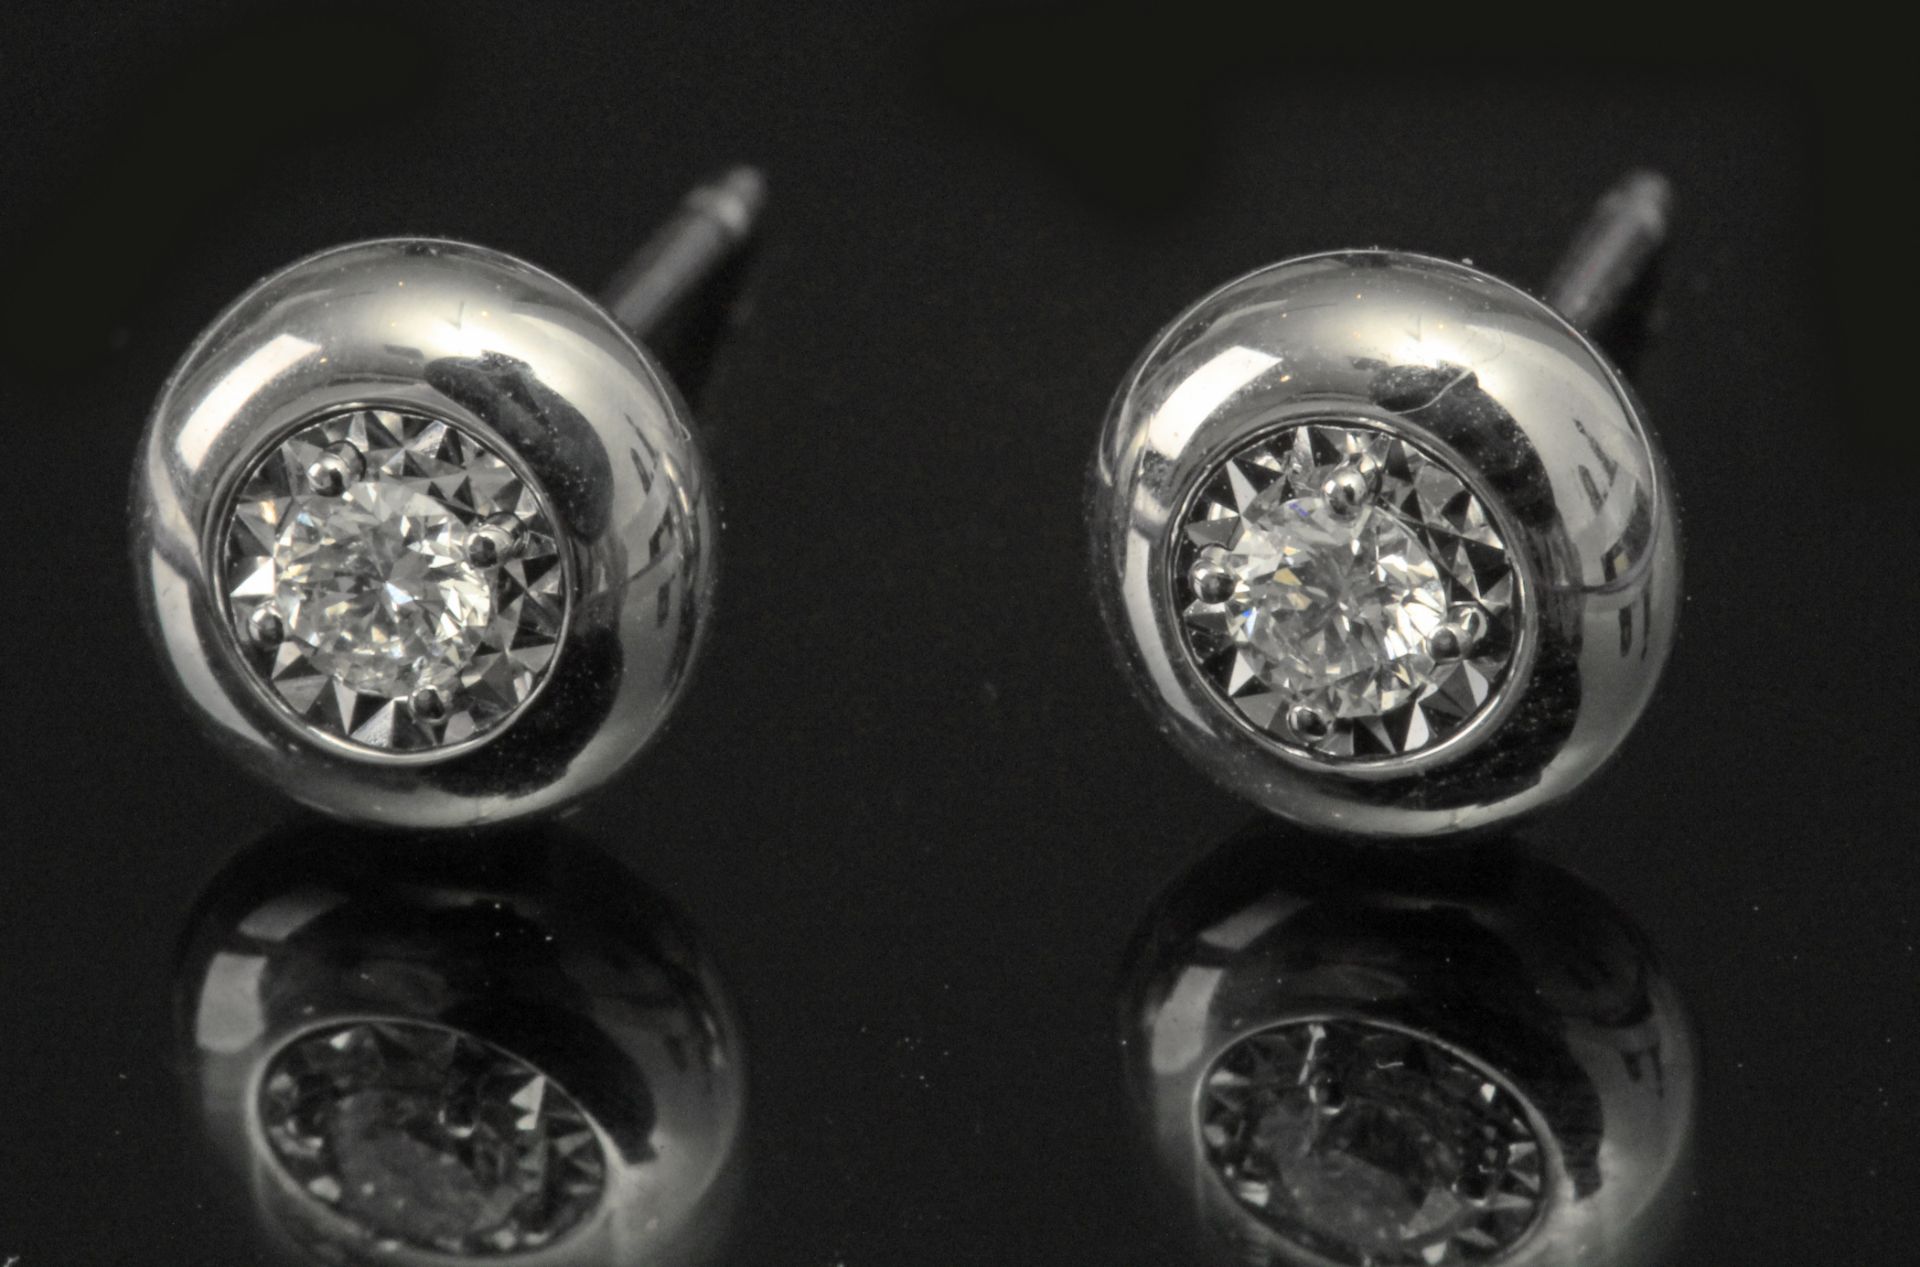 A pair of brilliant cut diamonds stud earrings with an 18 k. white gold setting